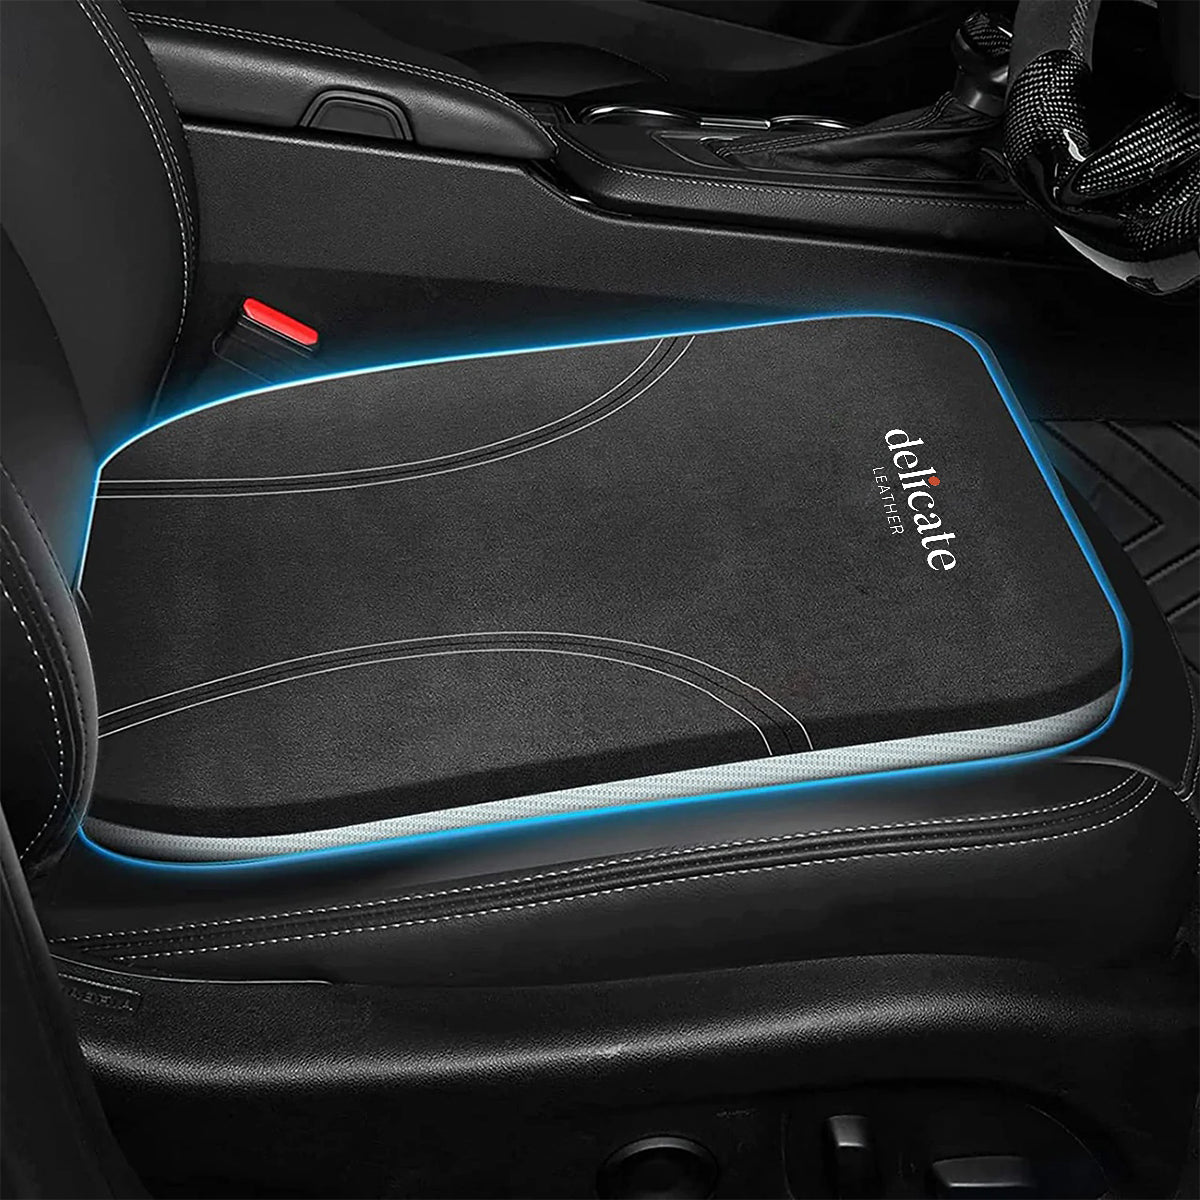 Mini Cooper Car Seat Cushion: Enhance Comfort and Support for Your Drive